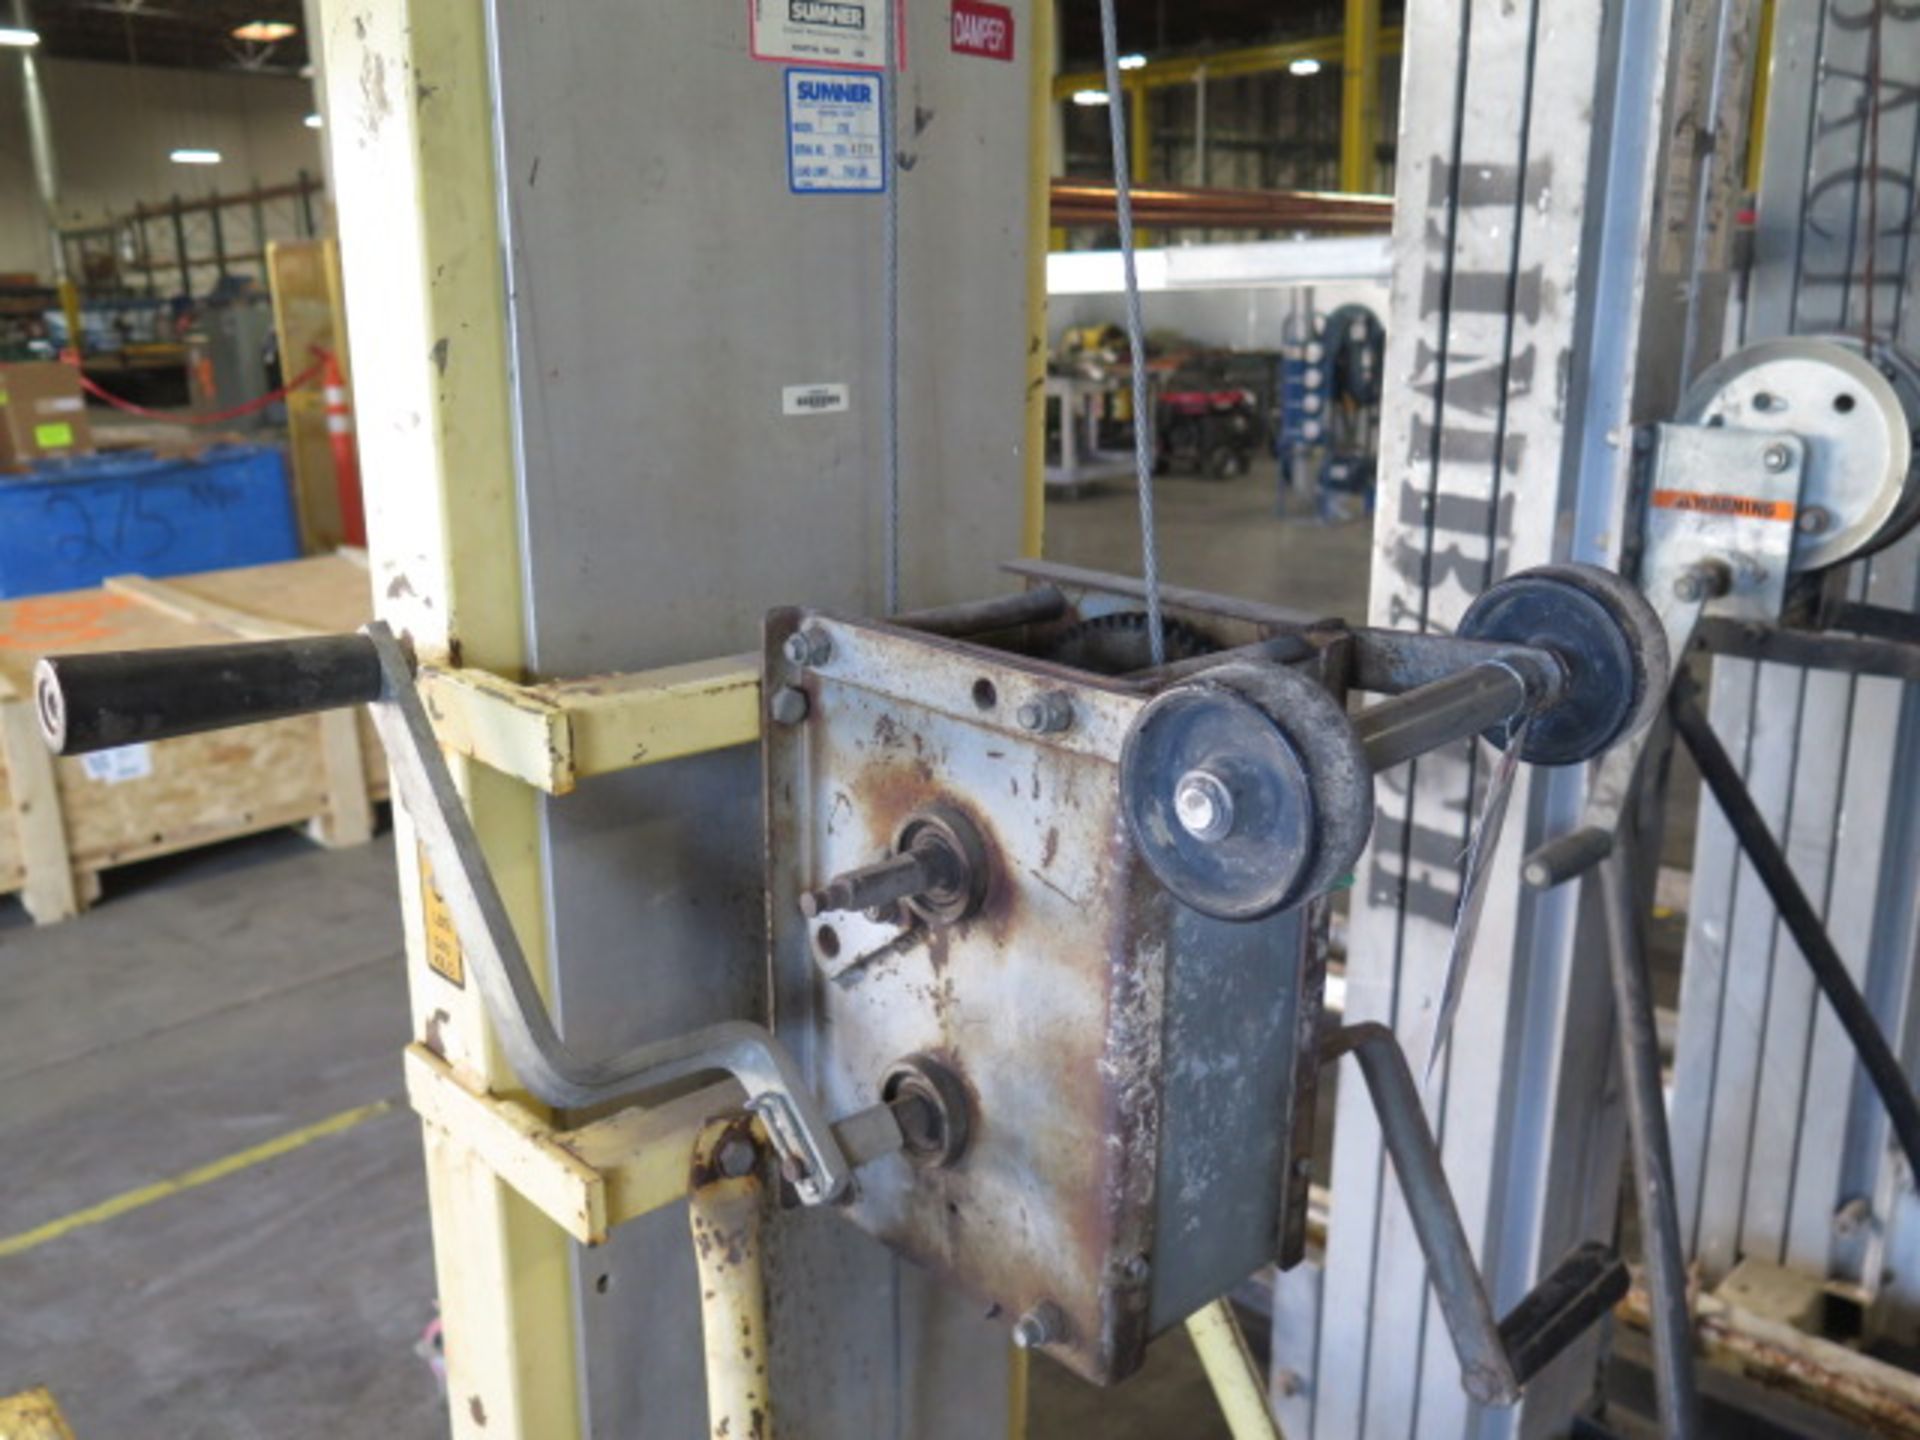 Sumner Material Lift (SOLD AS-IS - NO WARRANTY) - Image 5 of 7